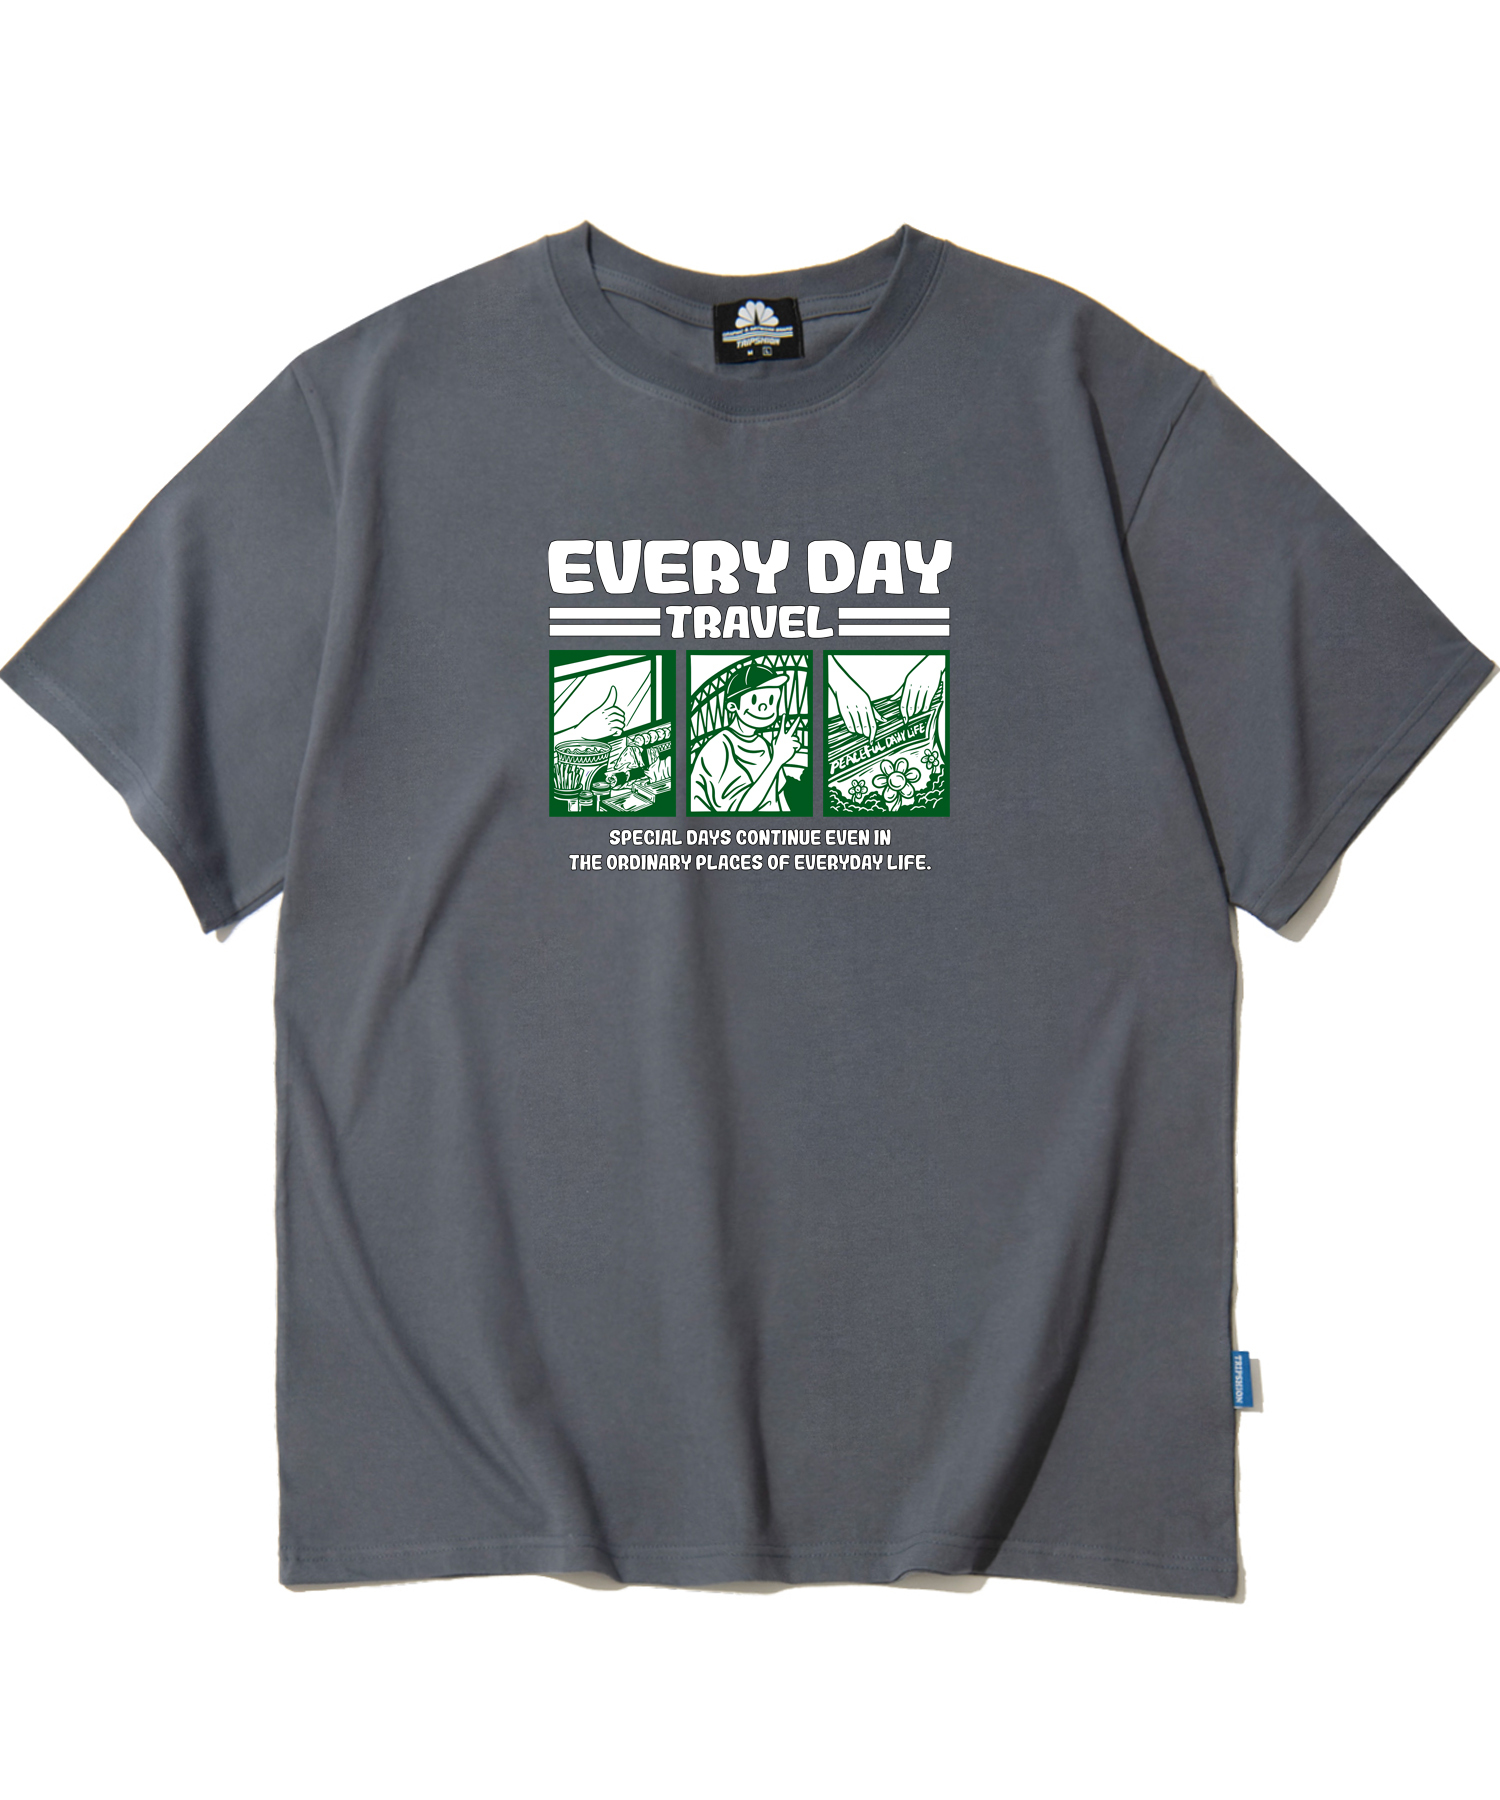 EVERYDAY CARTTON GRAPHIC T-SHIRTS - GRAY